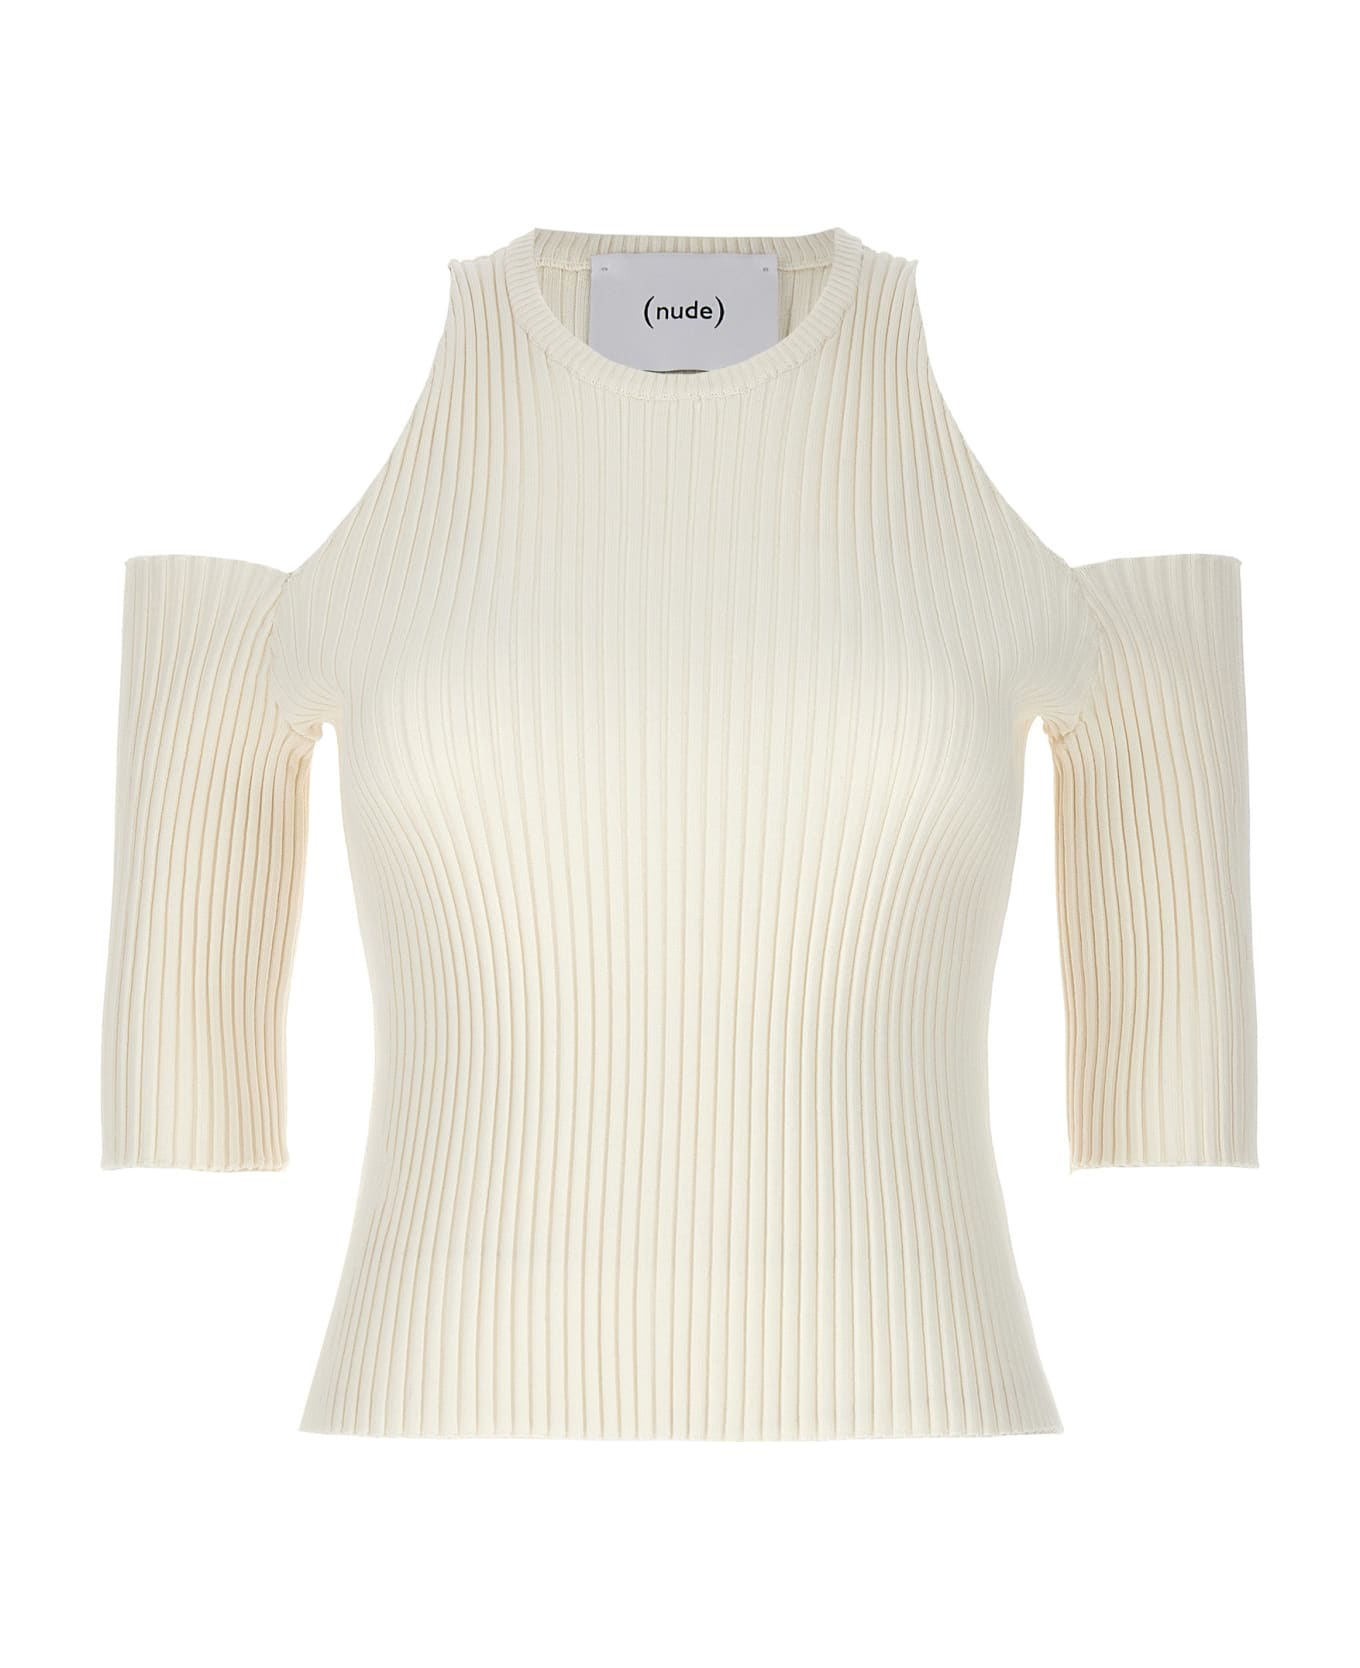 (nude) Cut-out Knit Top - White